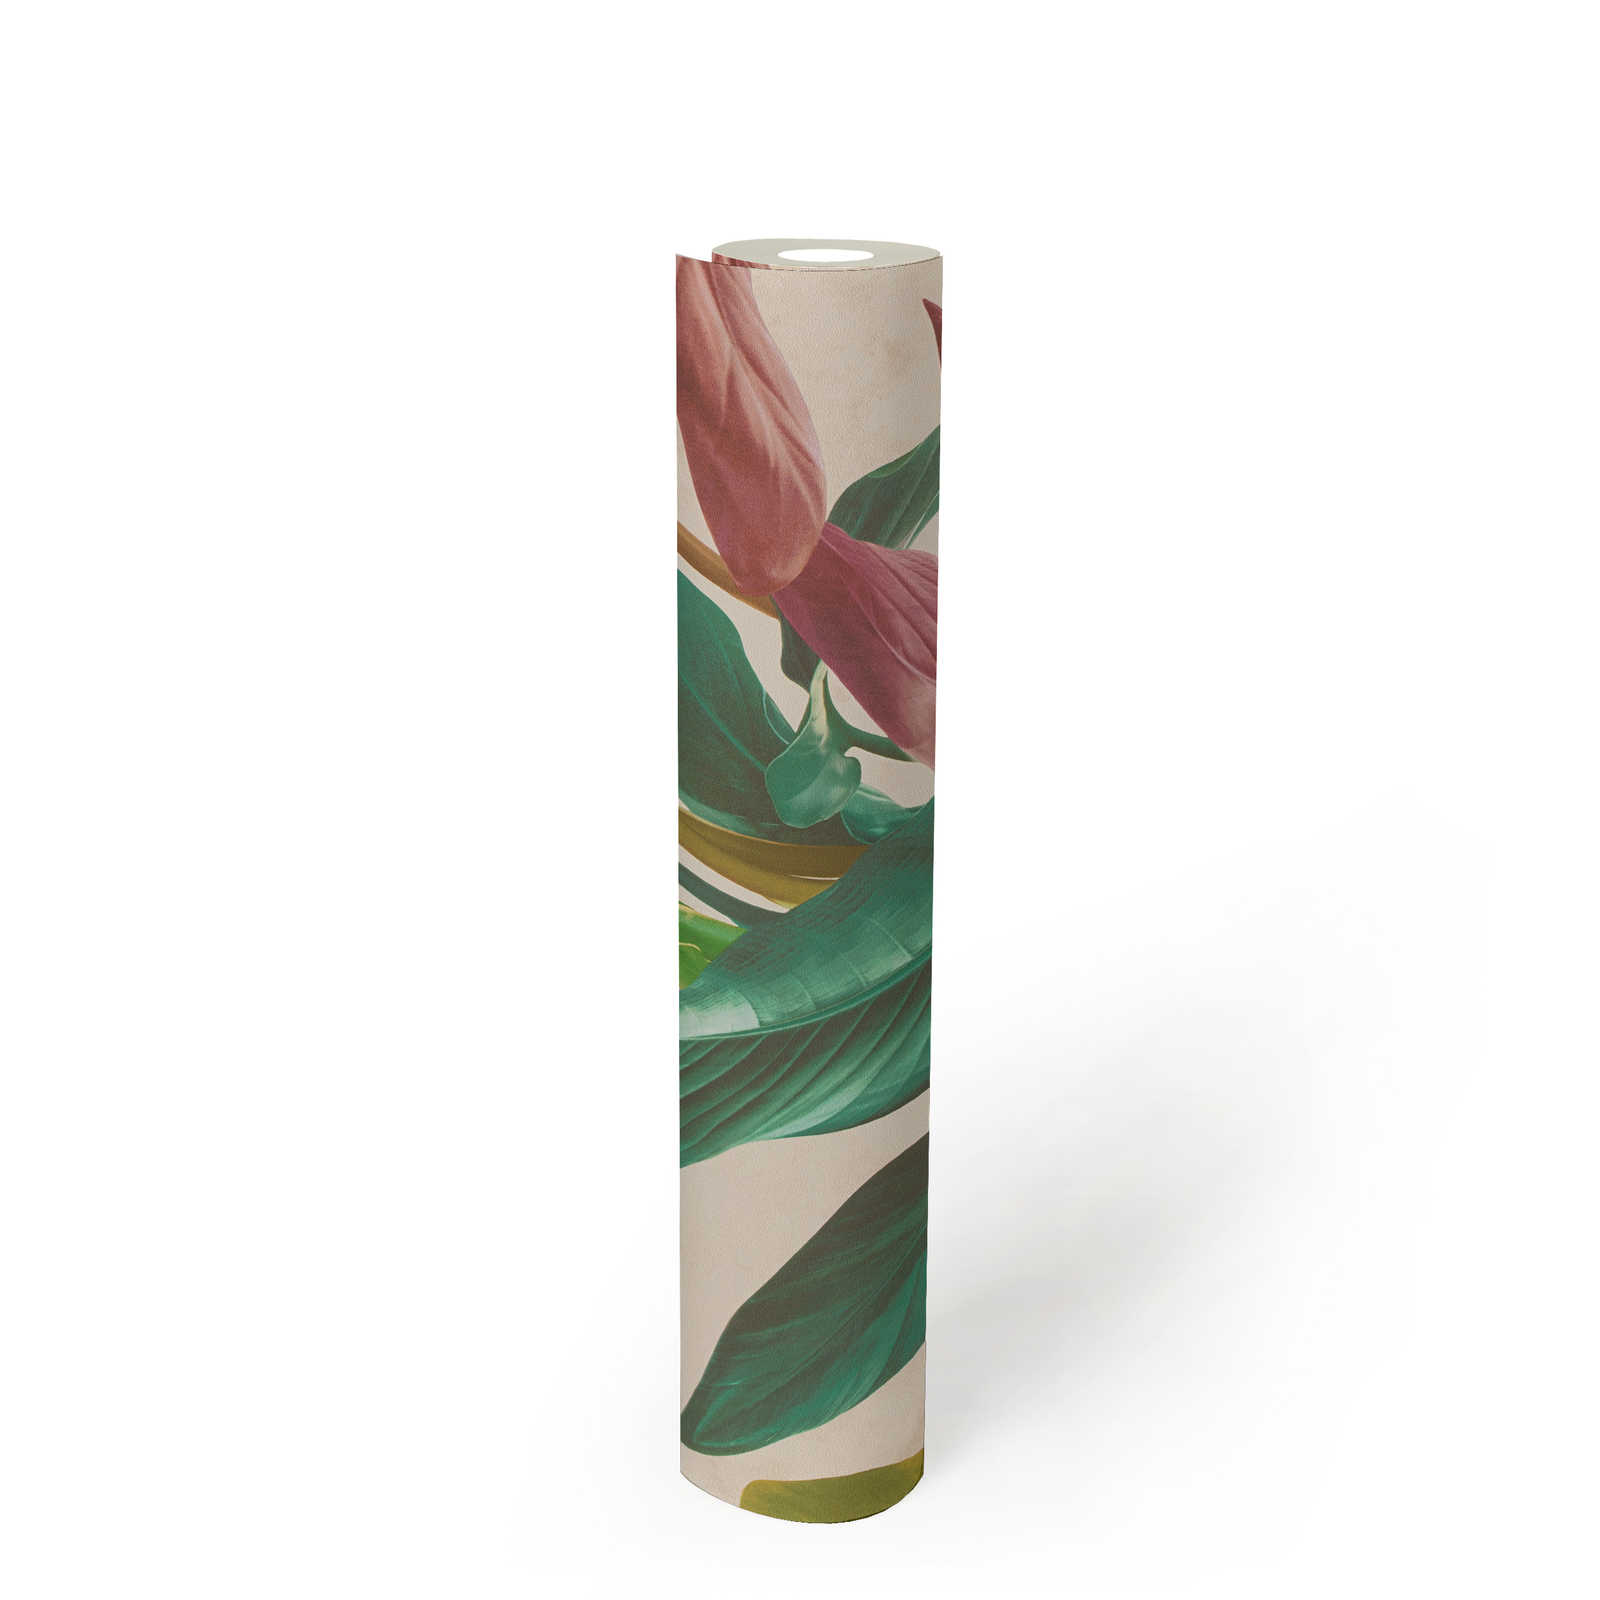             Wallpaper with leaves design in bright colours - colourful, cream, green
        